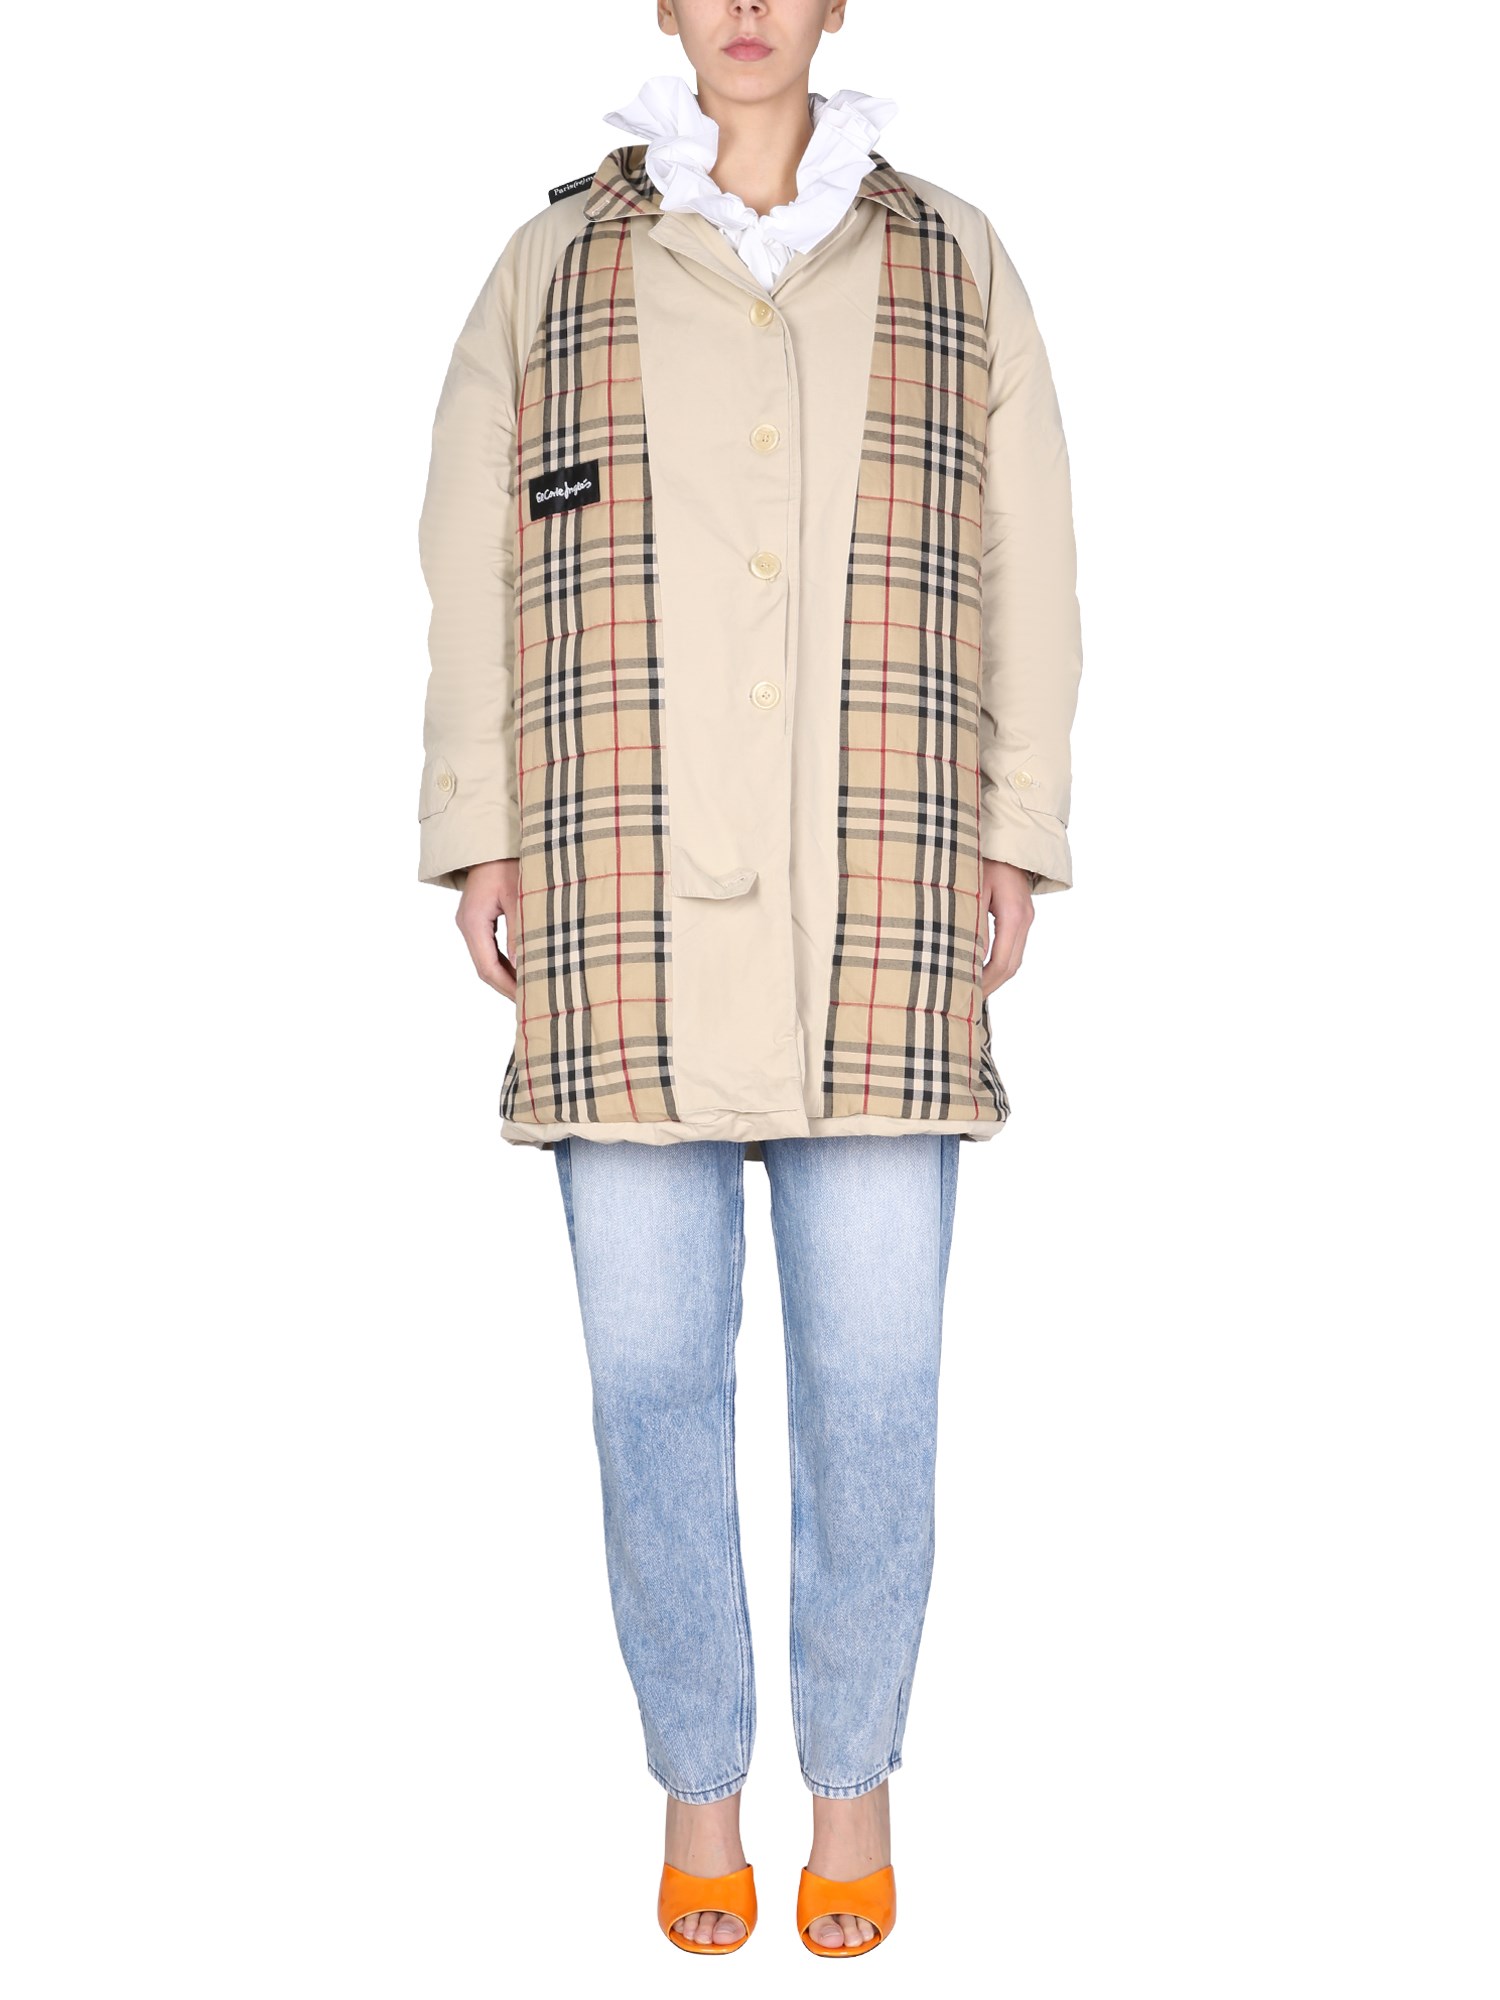 1/off trench remade burberry